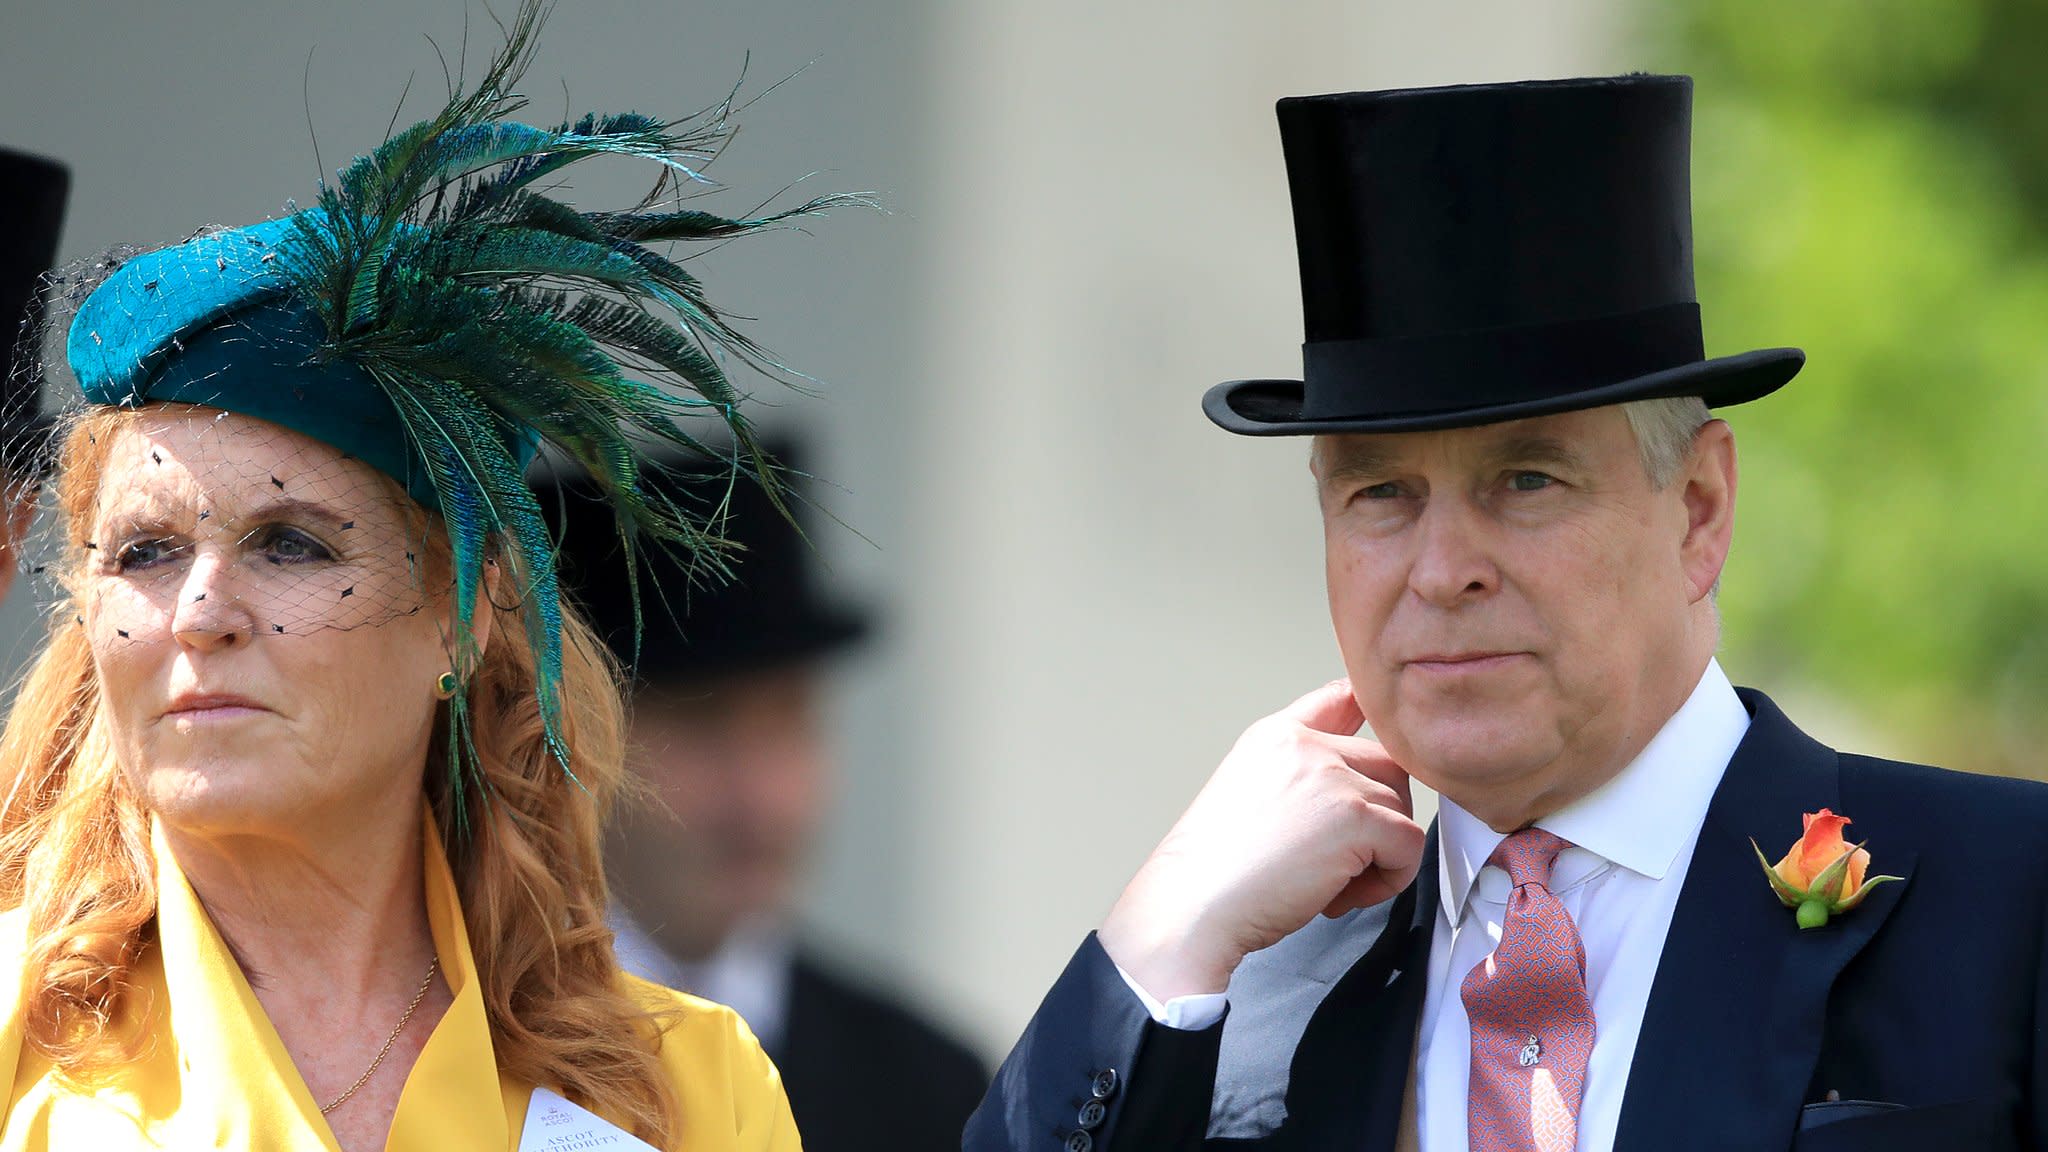 Duke of York pictured with ex-wife packing donations for hospice